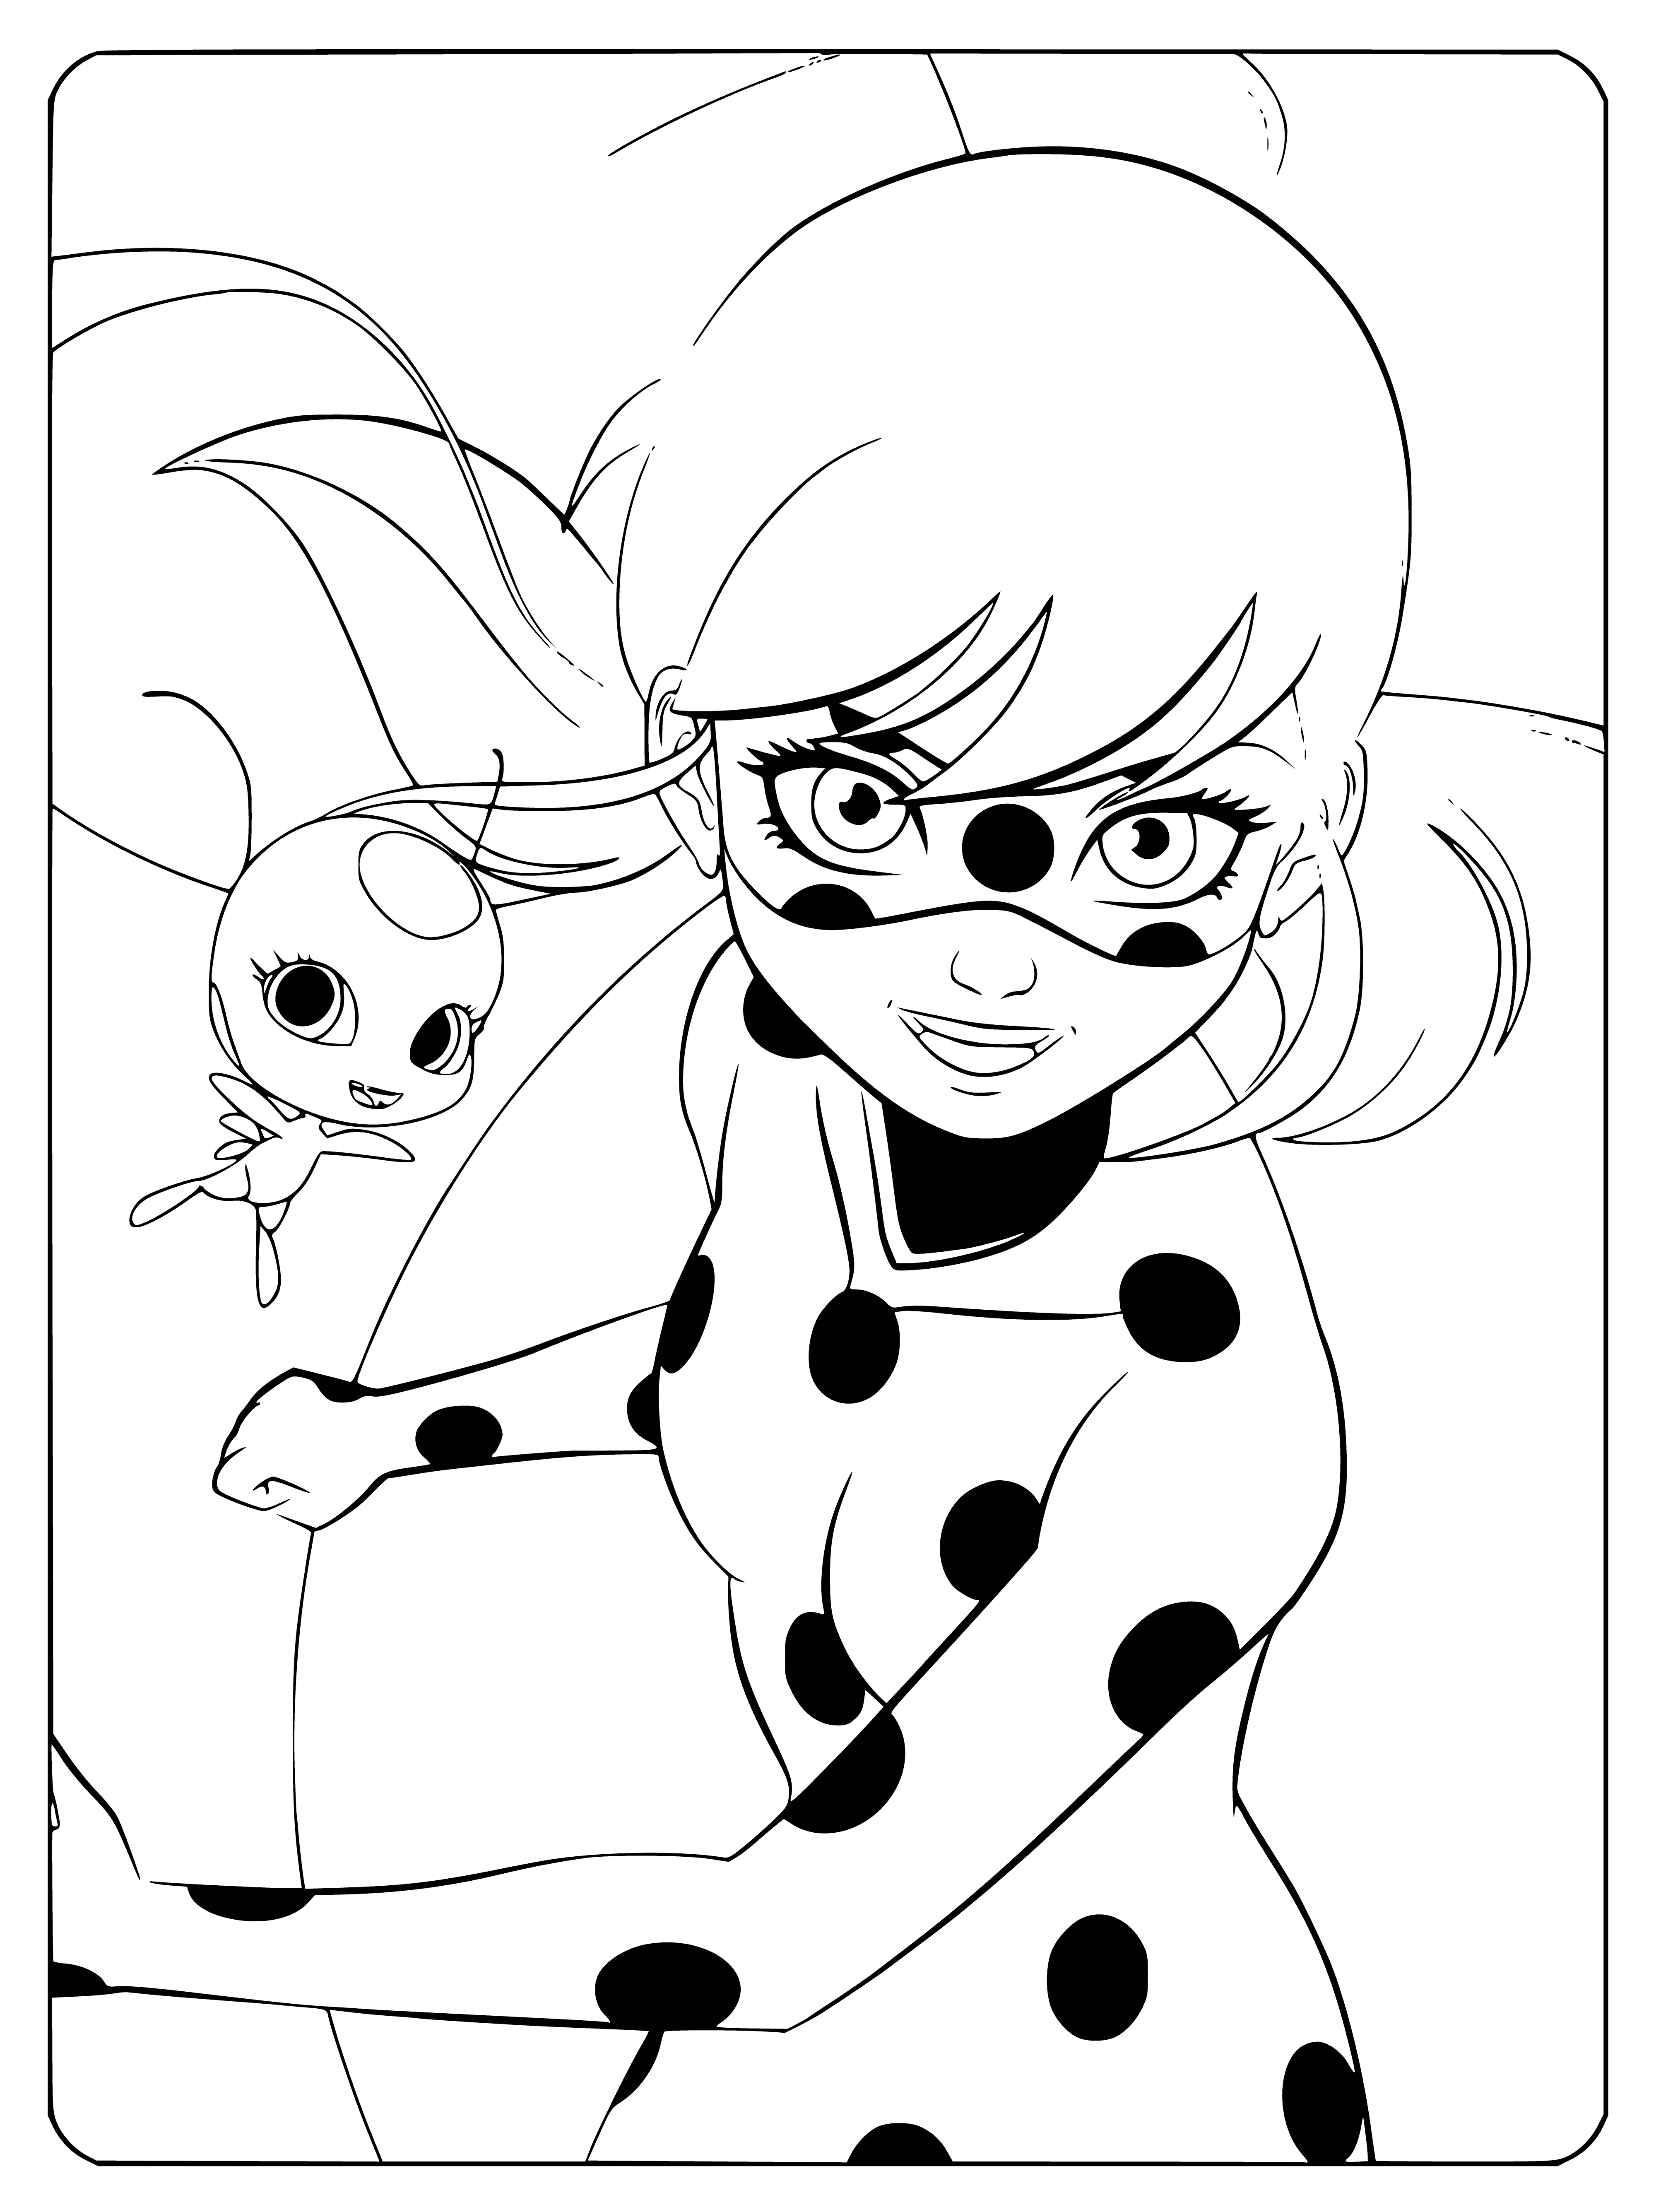 Lady Bug and Kwami Tikki coloring page